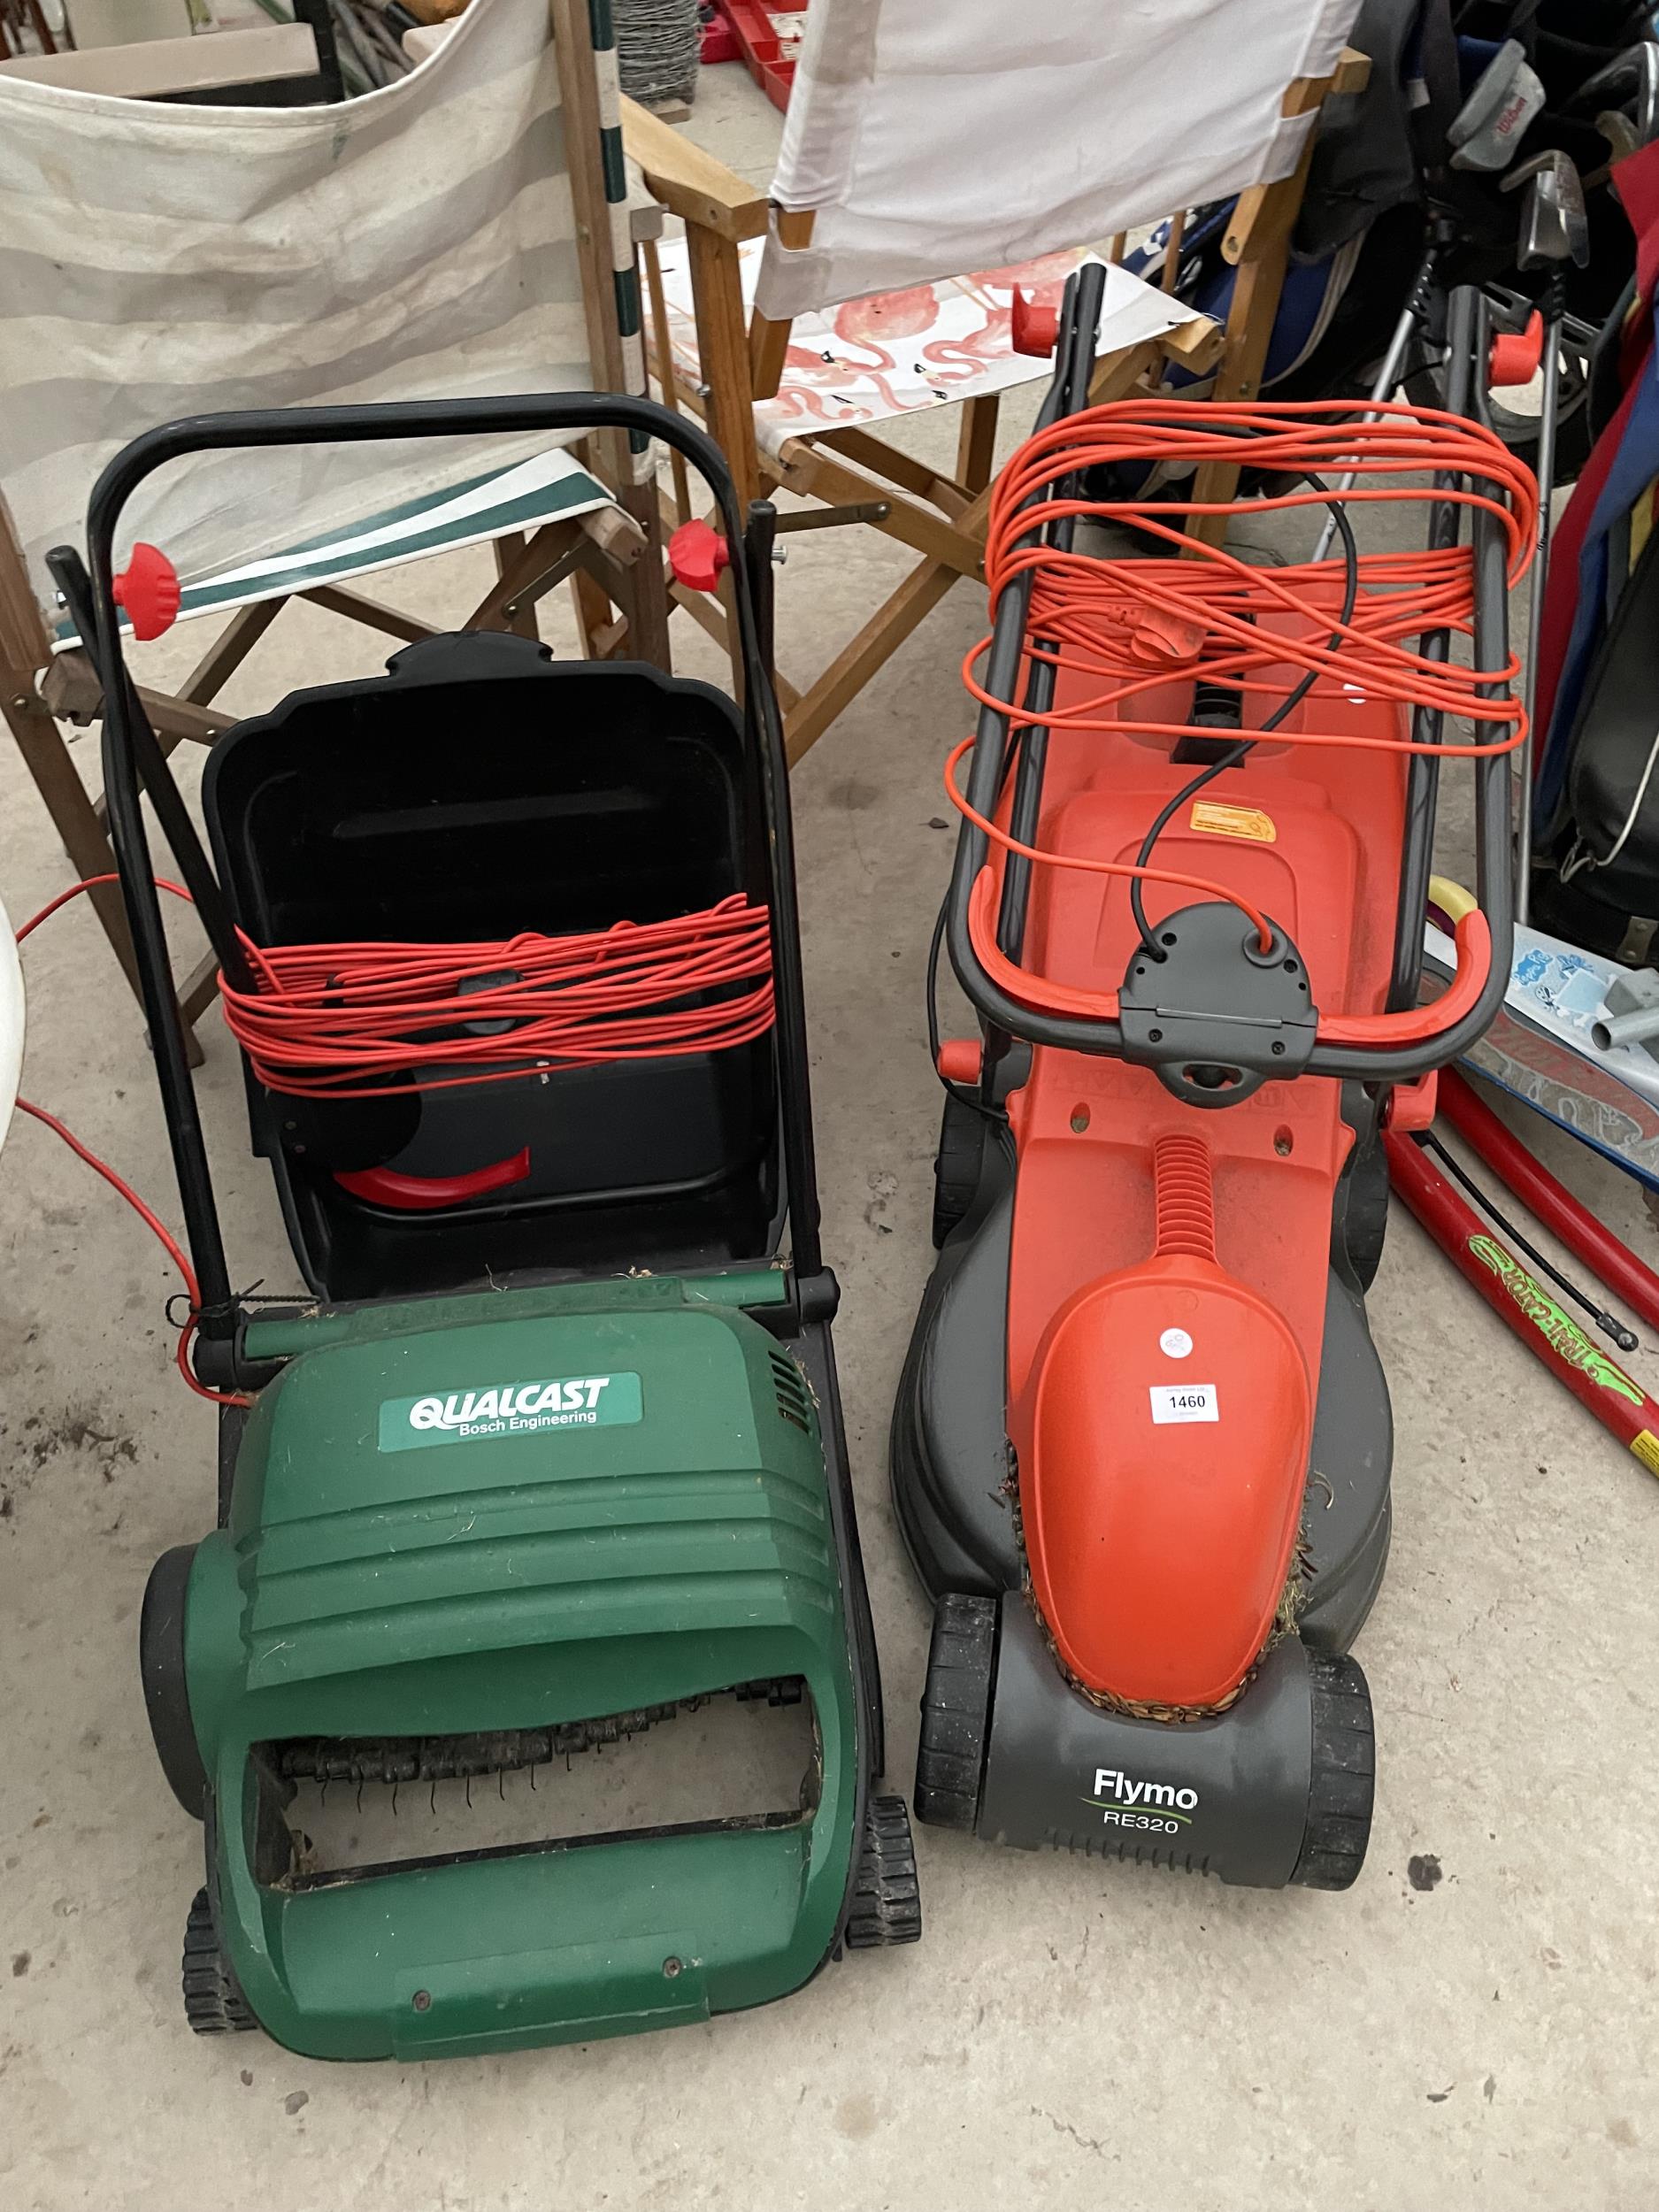 AN ELECTRIC FLYMO LAWNMOWER AND A QUALCAST LAWN RAKE